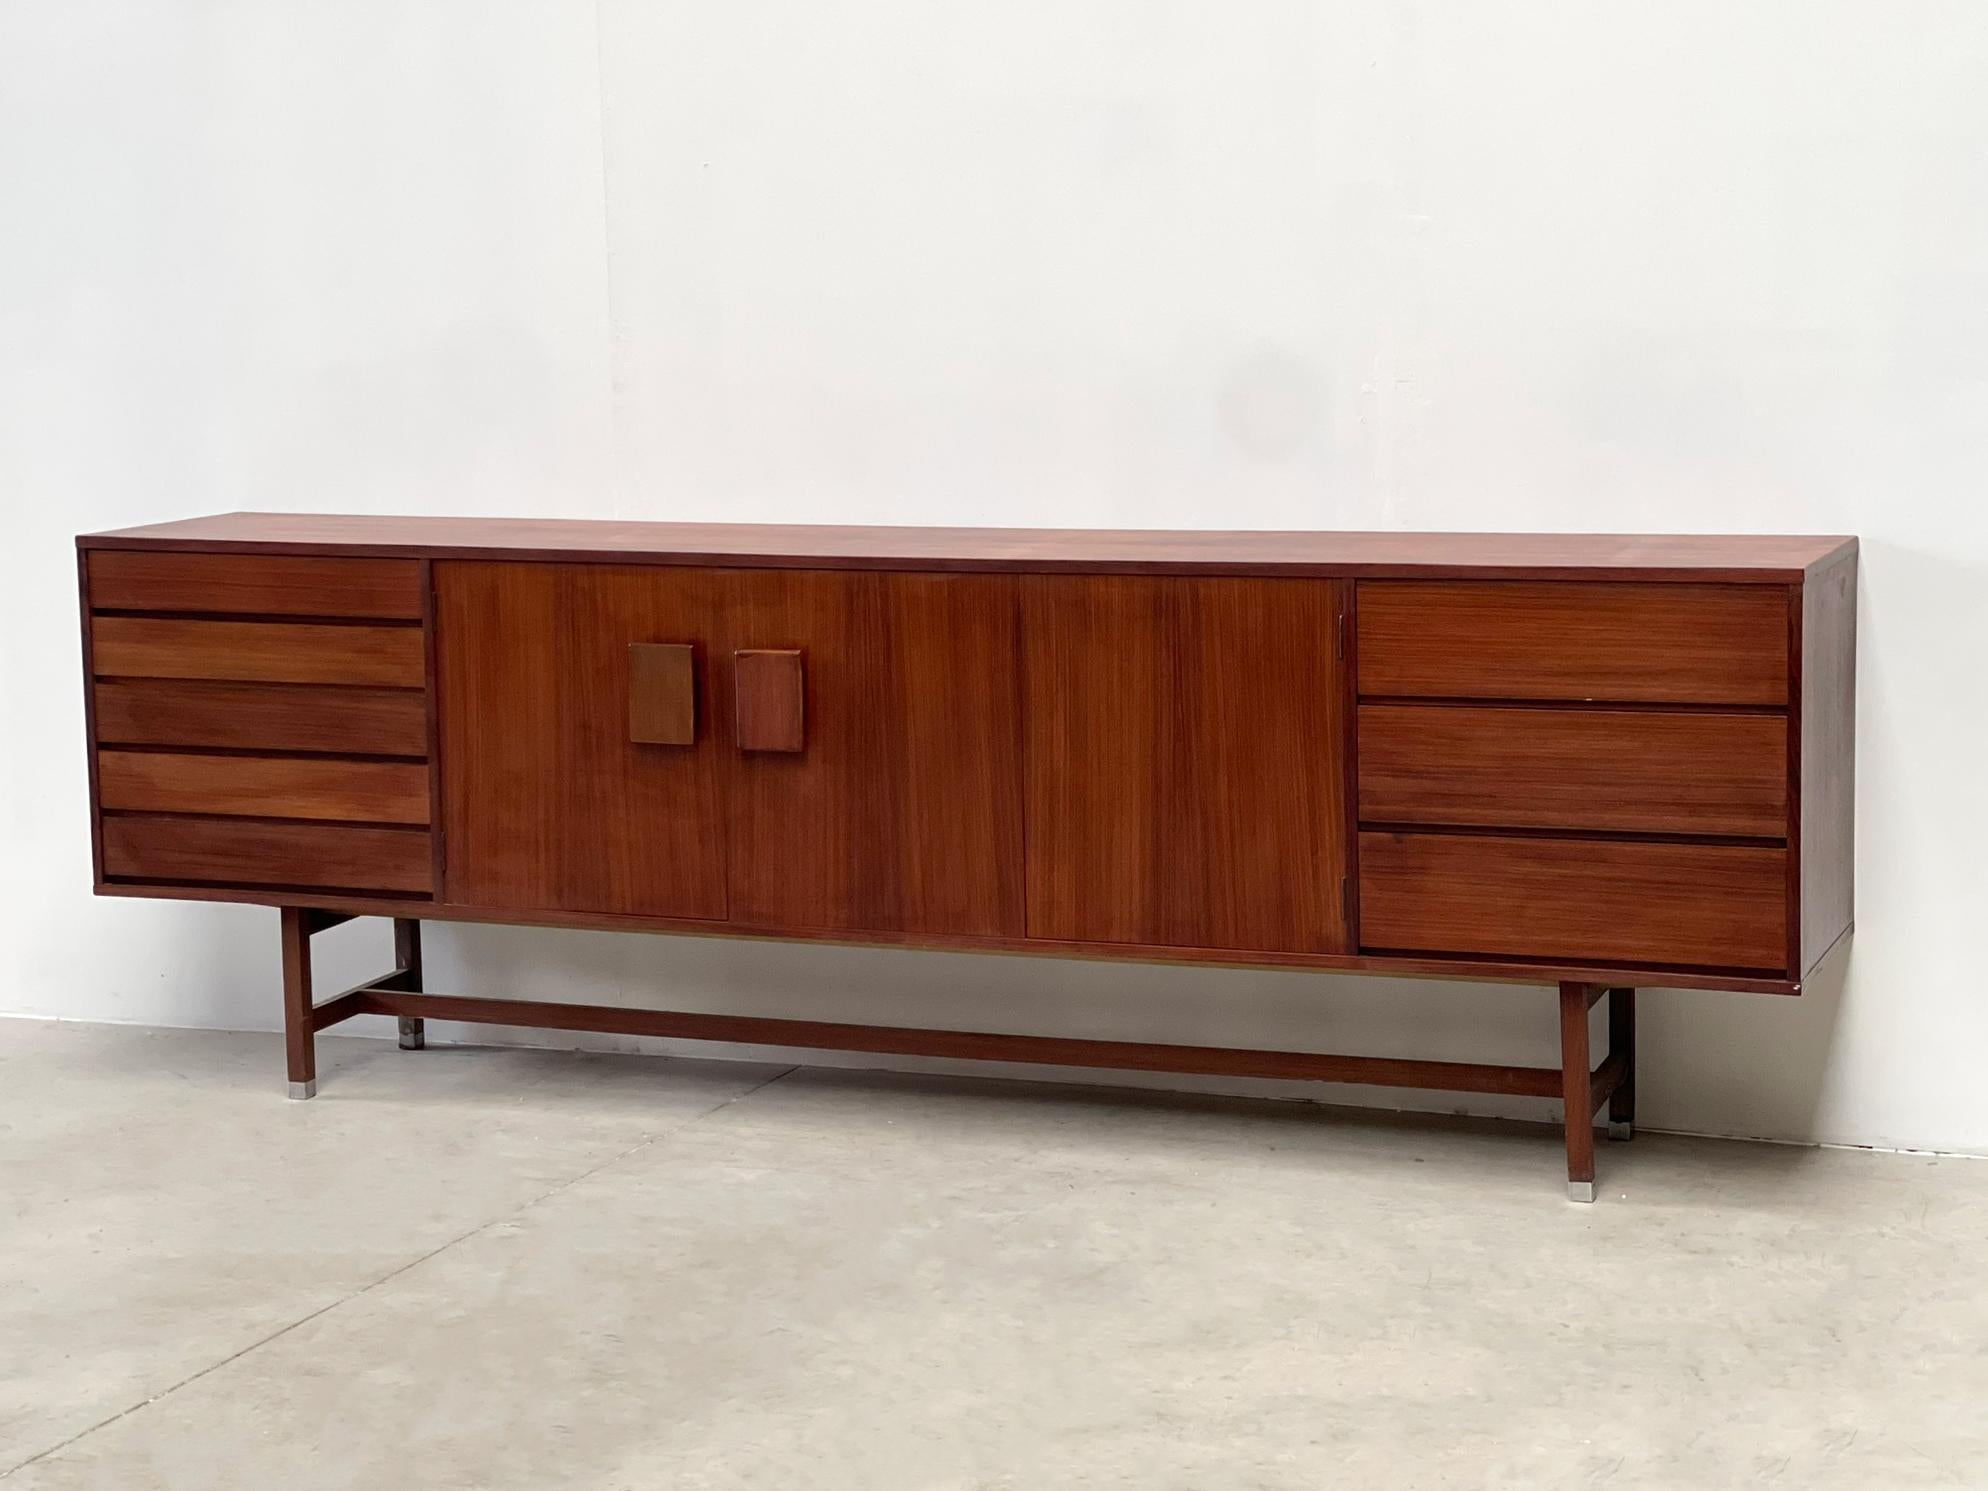 Very nice Danish/Dutch sideboard. Inger Klingenberg who was together with Ross Littel designed this sideboard in the 1960s for the Dutch company Fristho. This sideboard is part of the 